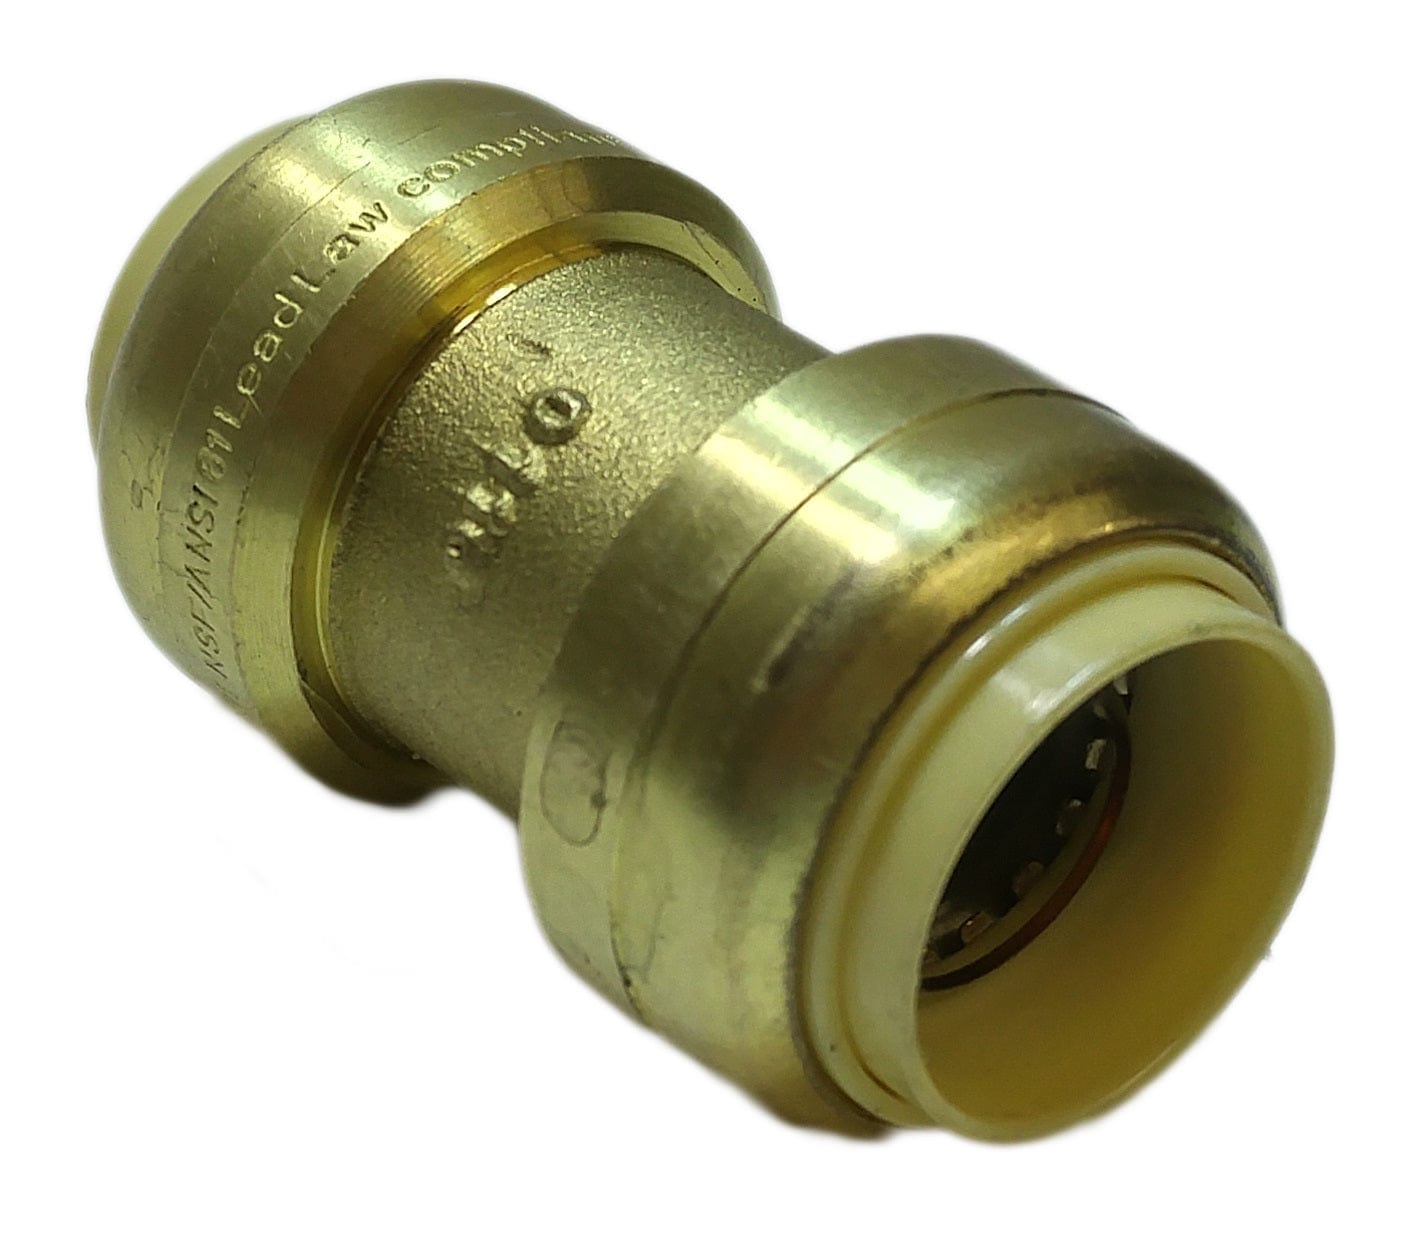 LF Quick Connect Push Fitting Coupling 2" x 1-1/2"